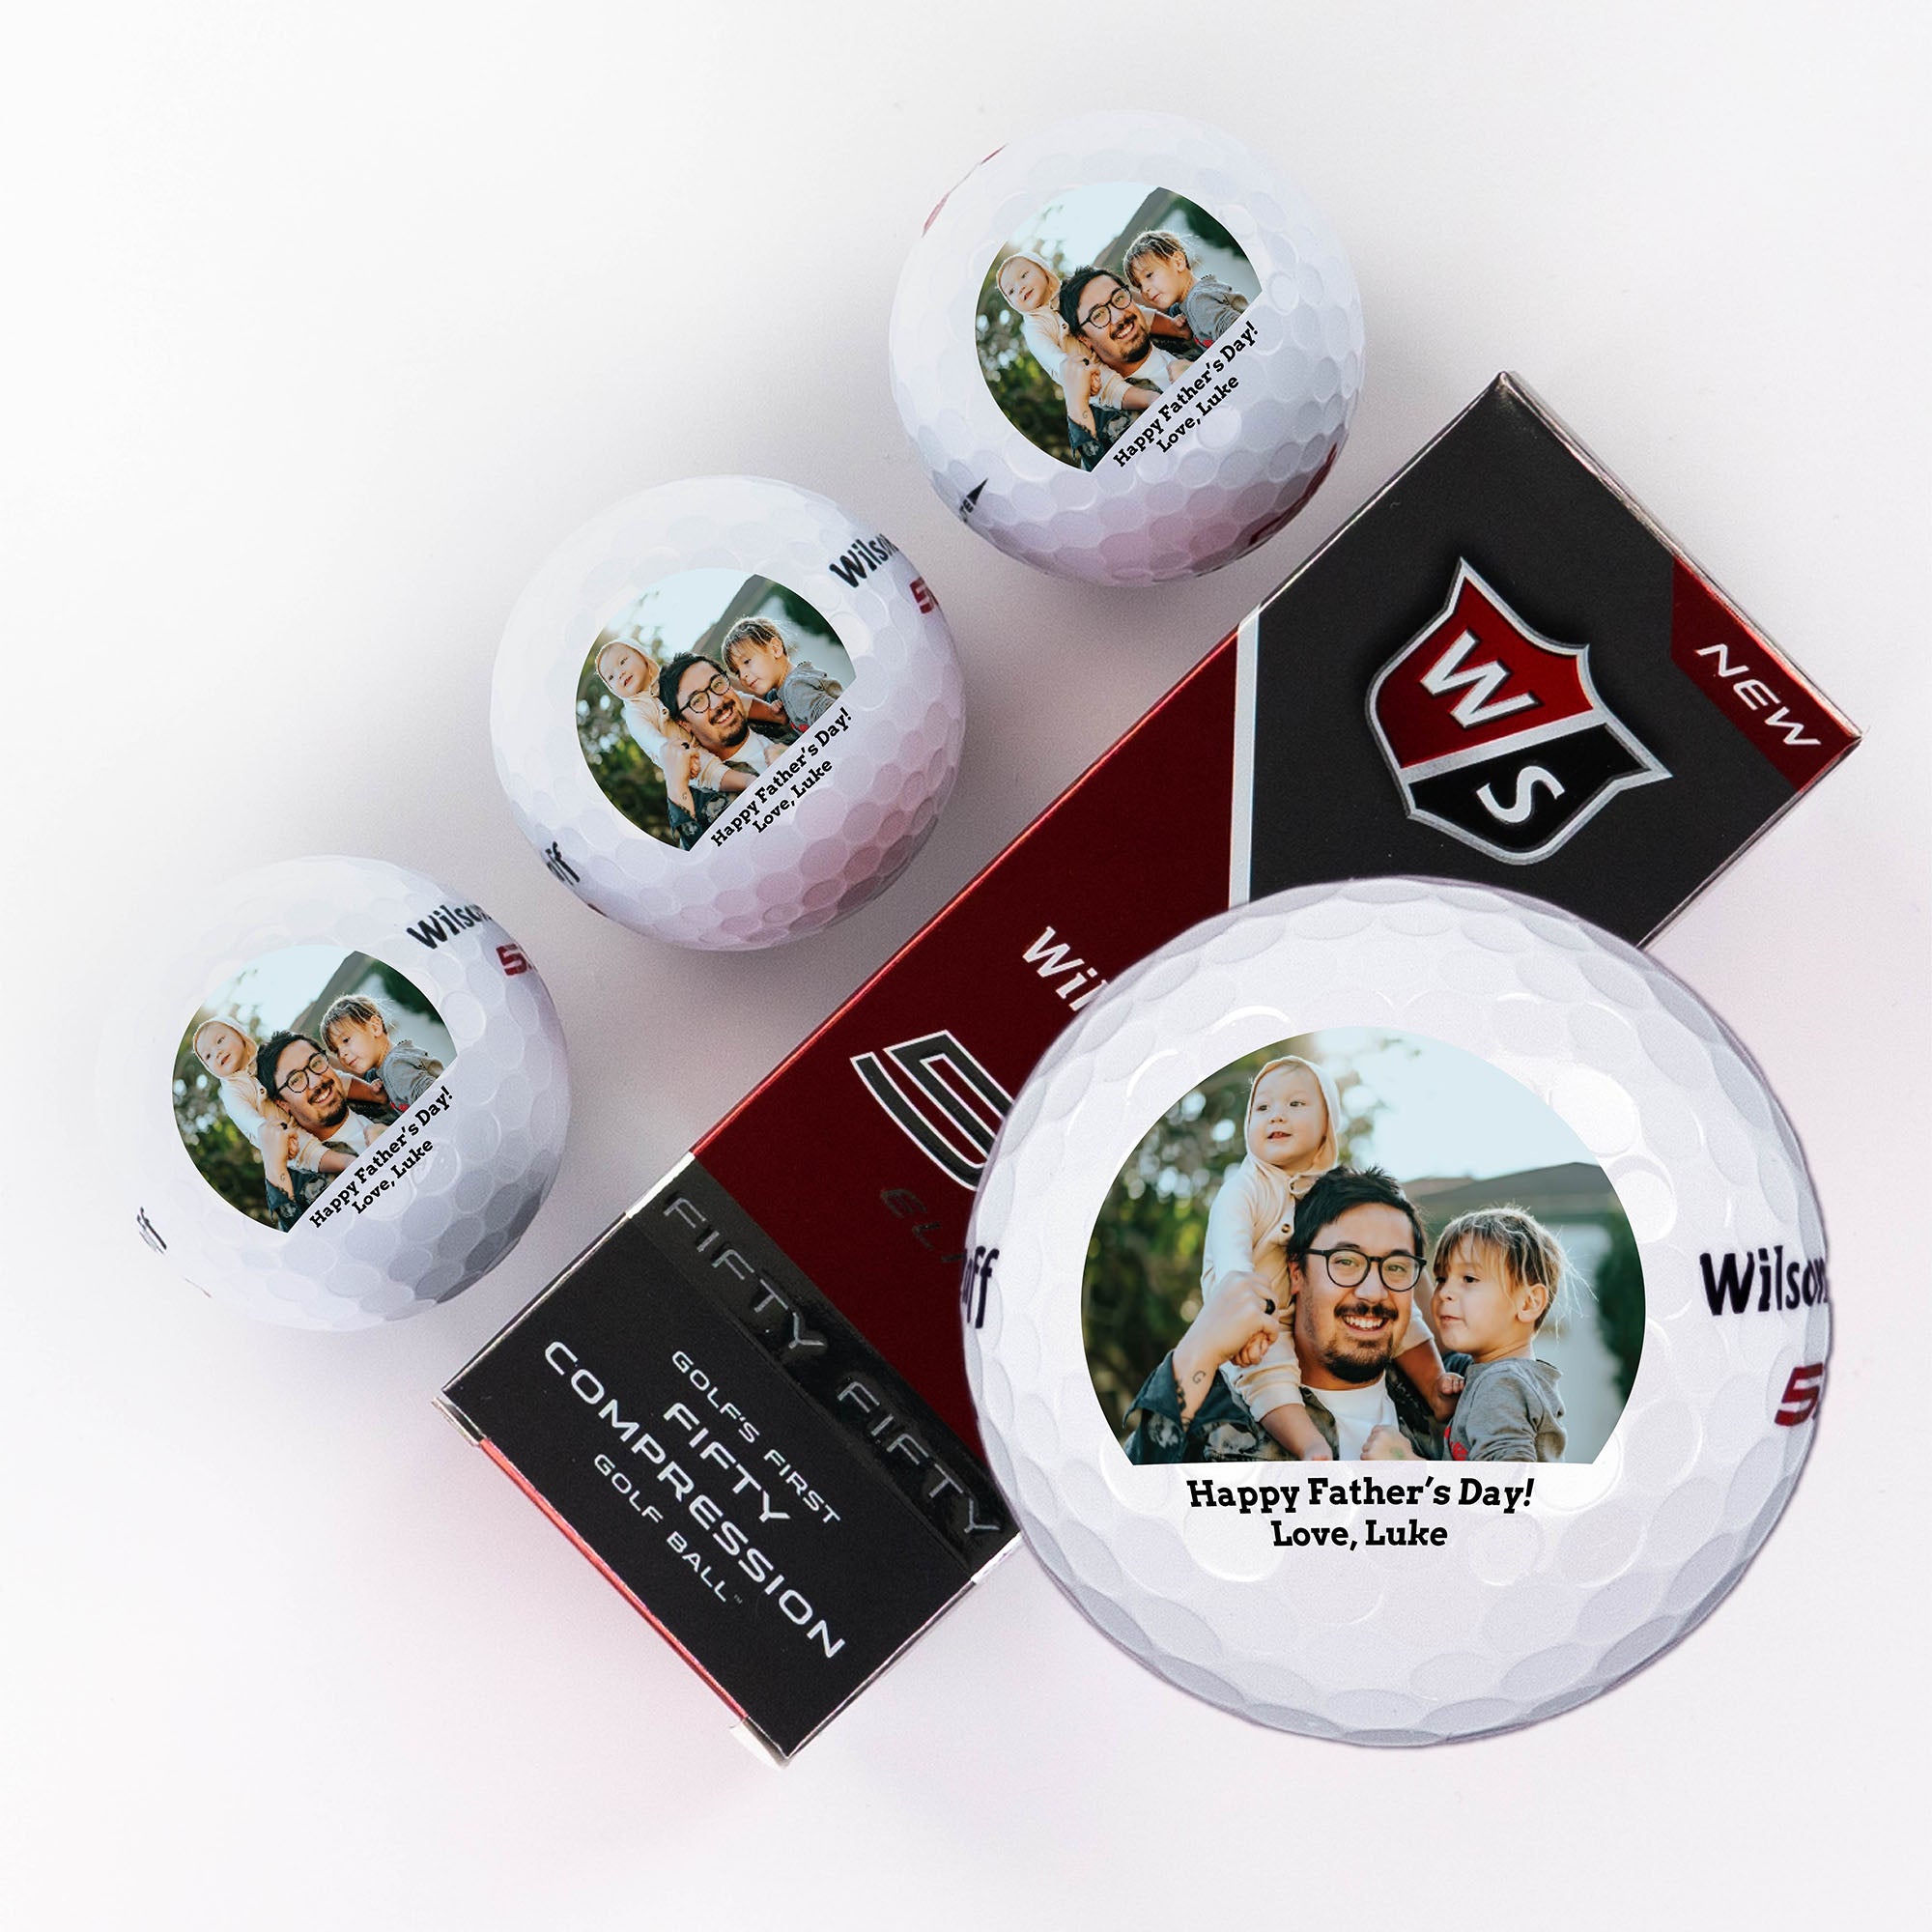 Printed Golf Balls, Dad & Father's Day Gifts